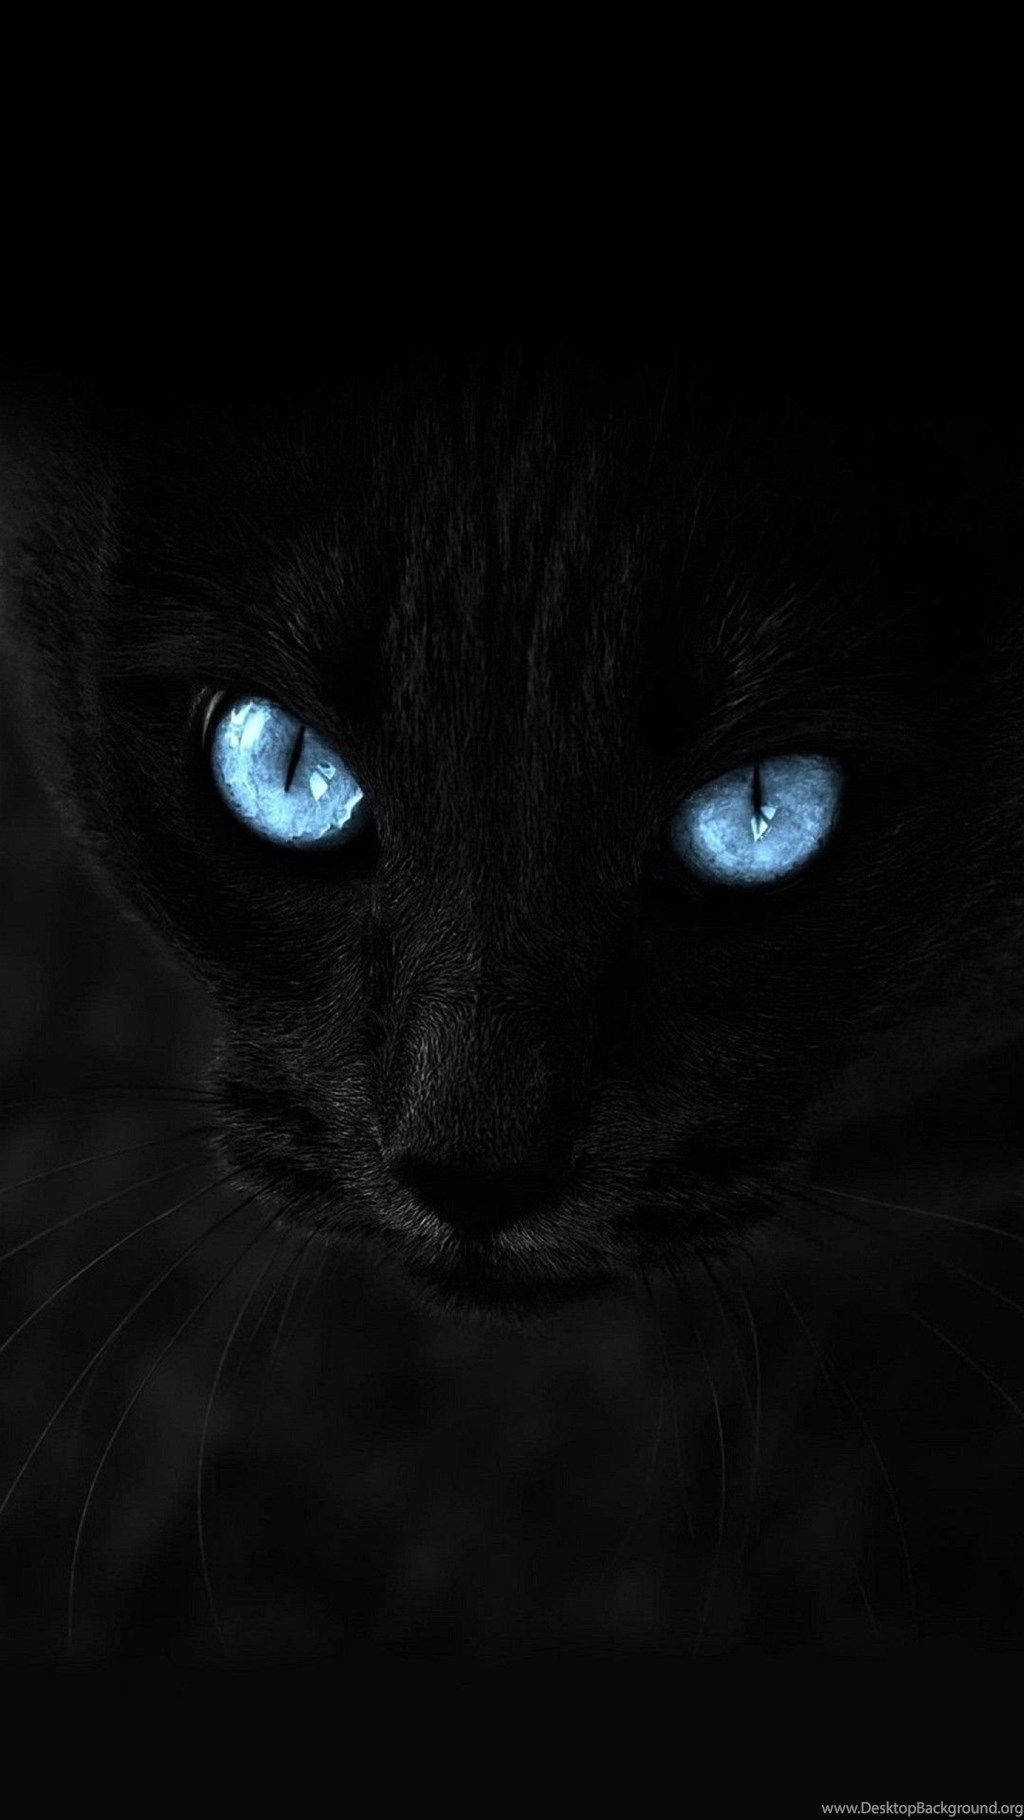 A Majestic Dark Cat With Blue Eyes For Your Iphone.